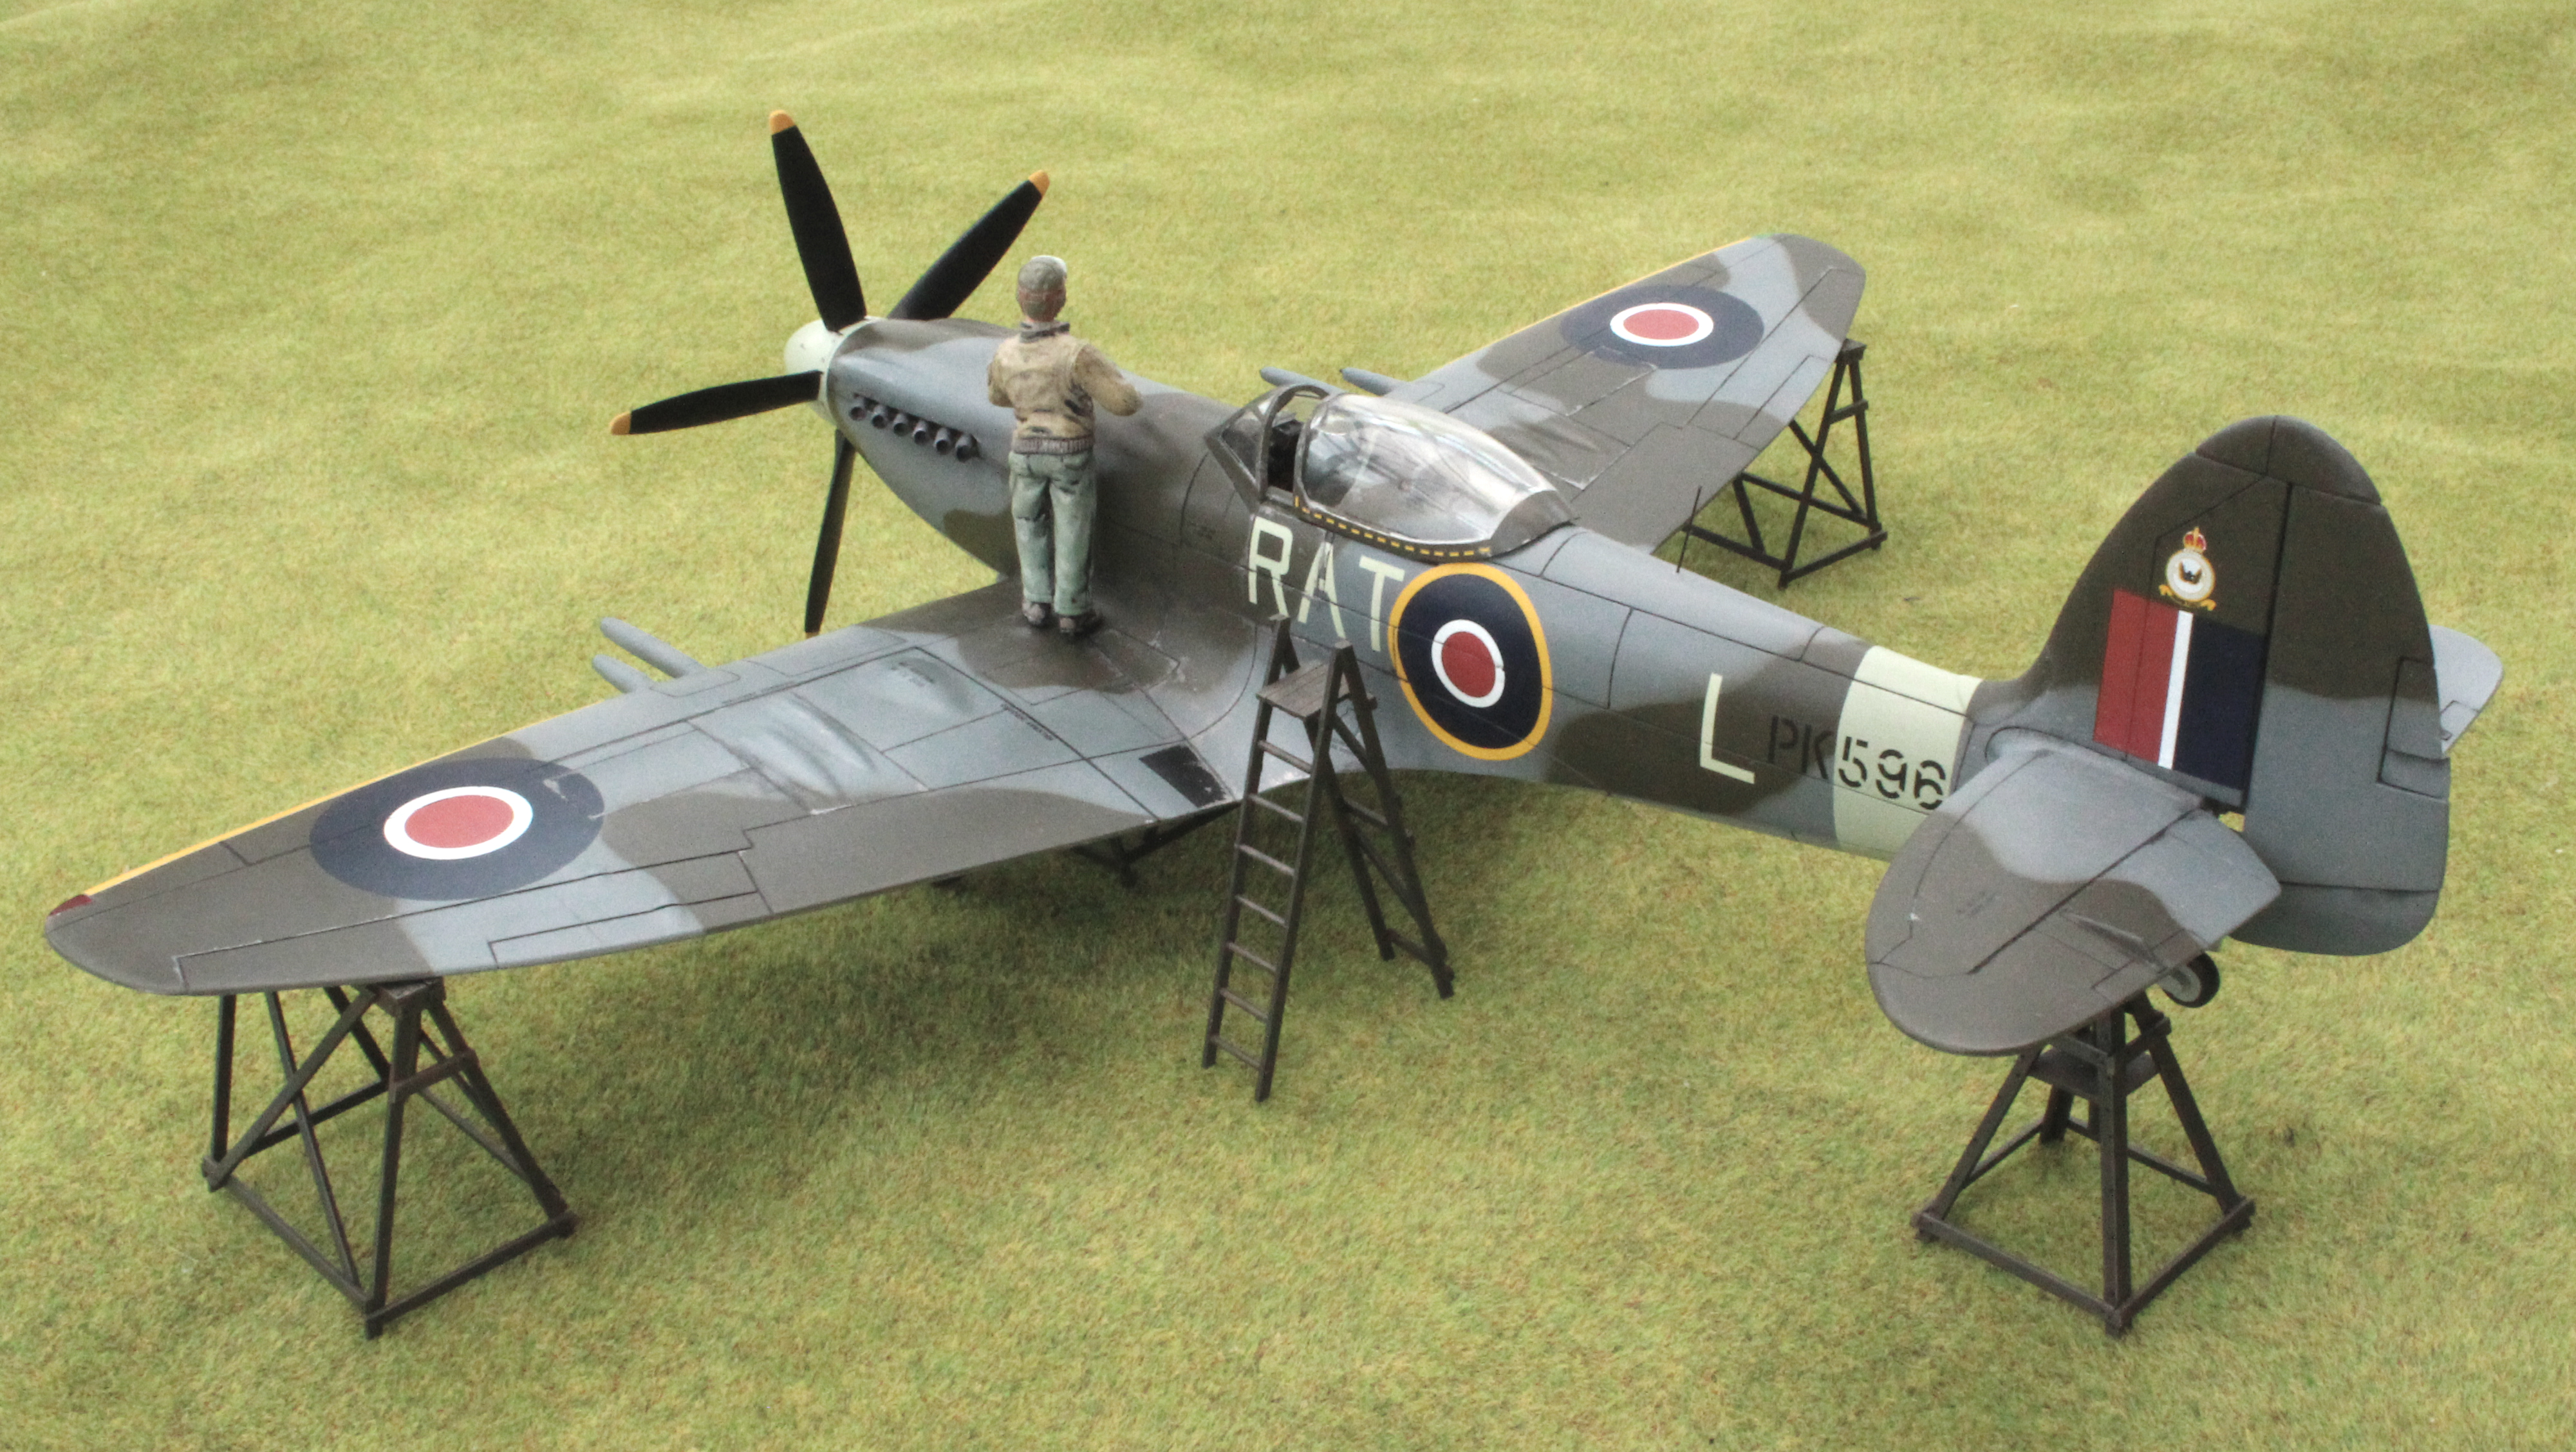 Supermarine Spitfire Mk.22, 613 (City of Manchester) Squadron, Royal Auxiliary Air Force. Revell kit in 1/32nd scale.